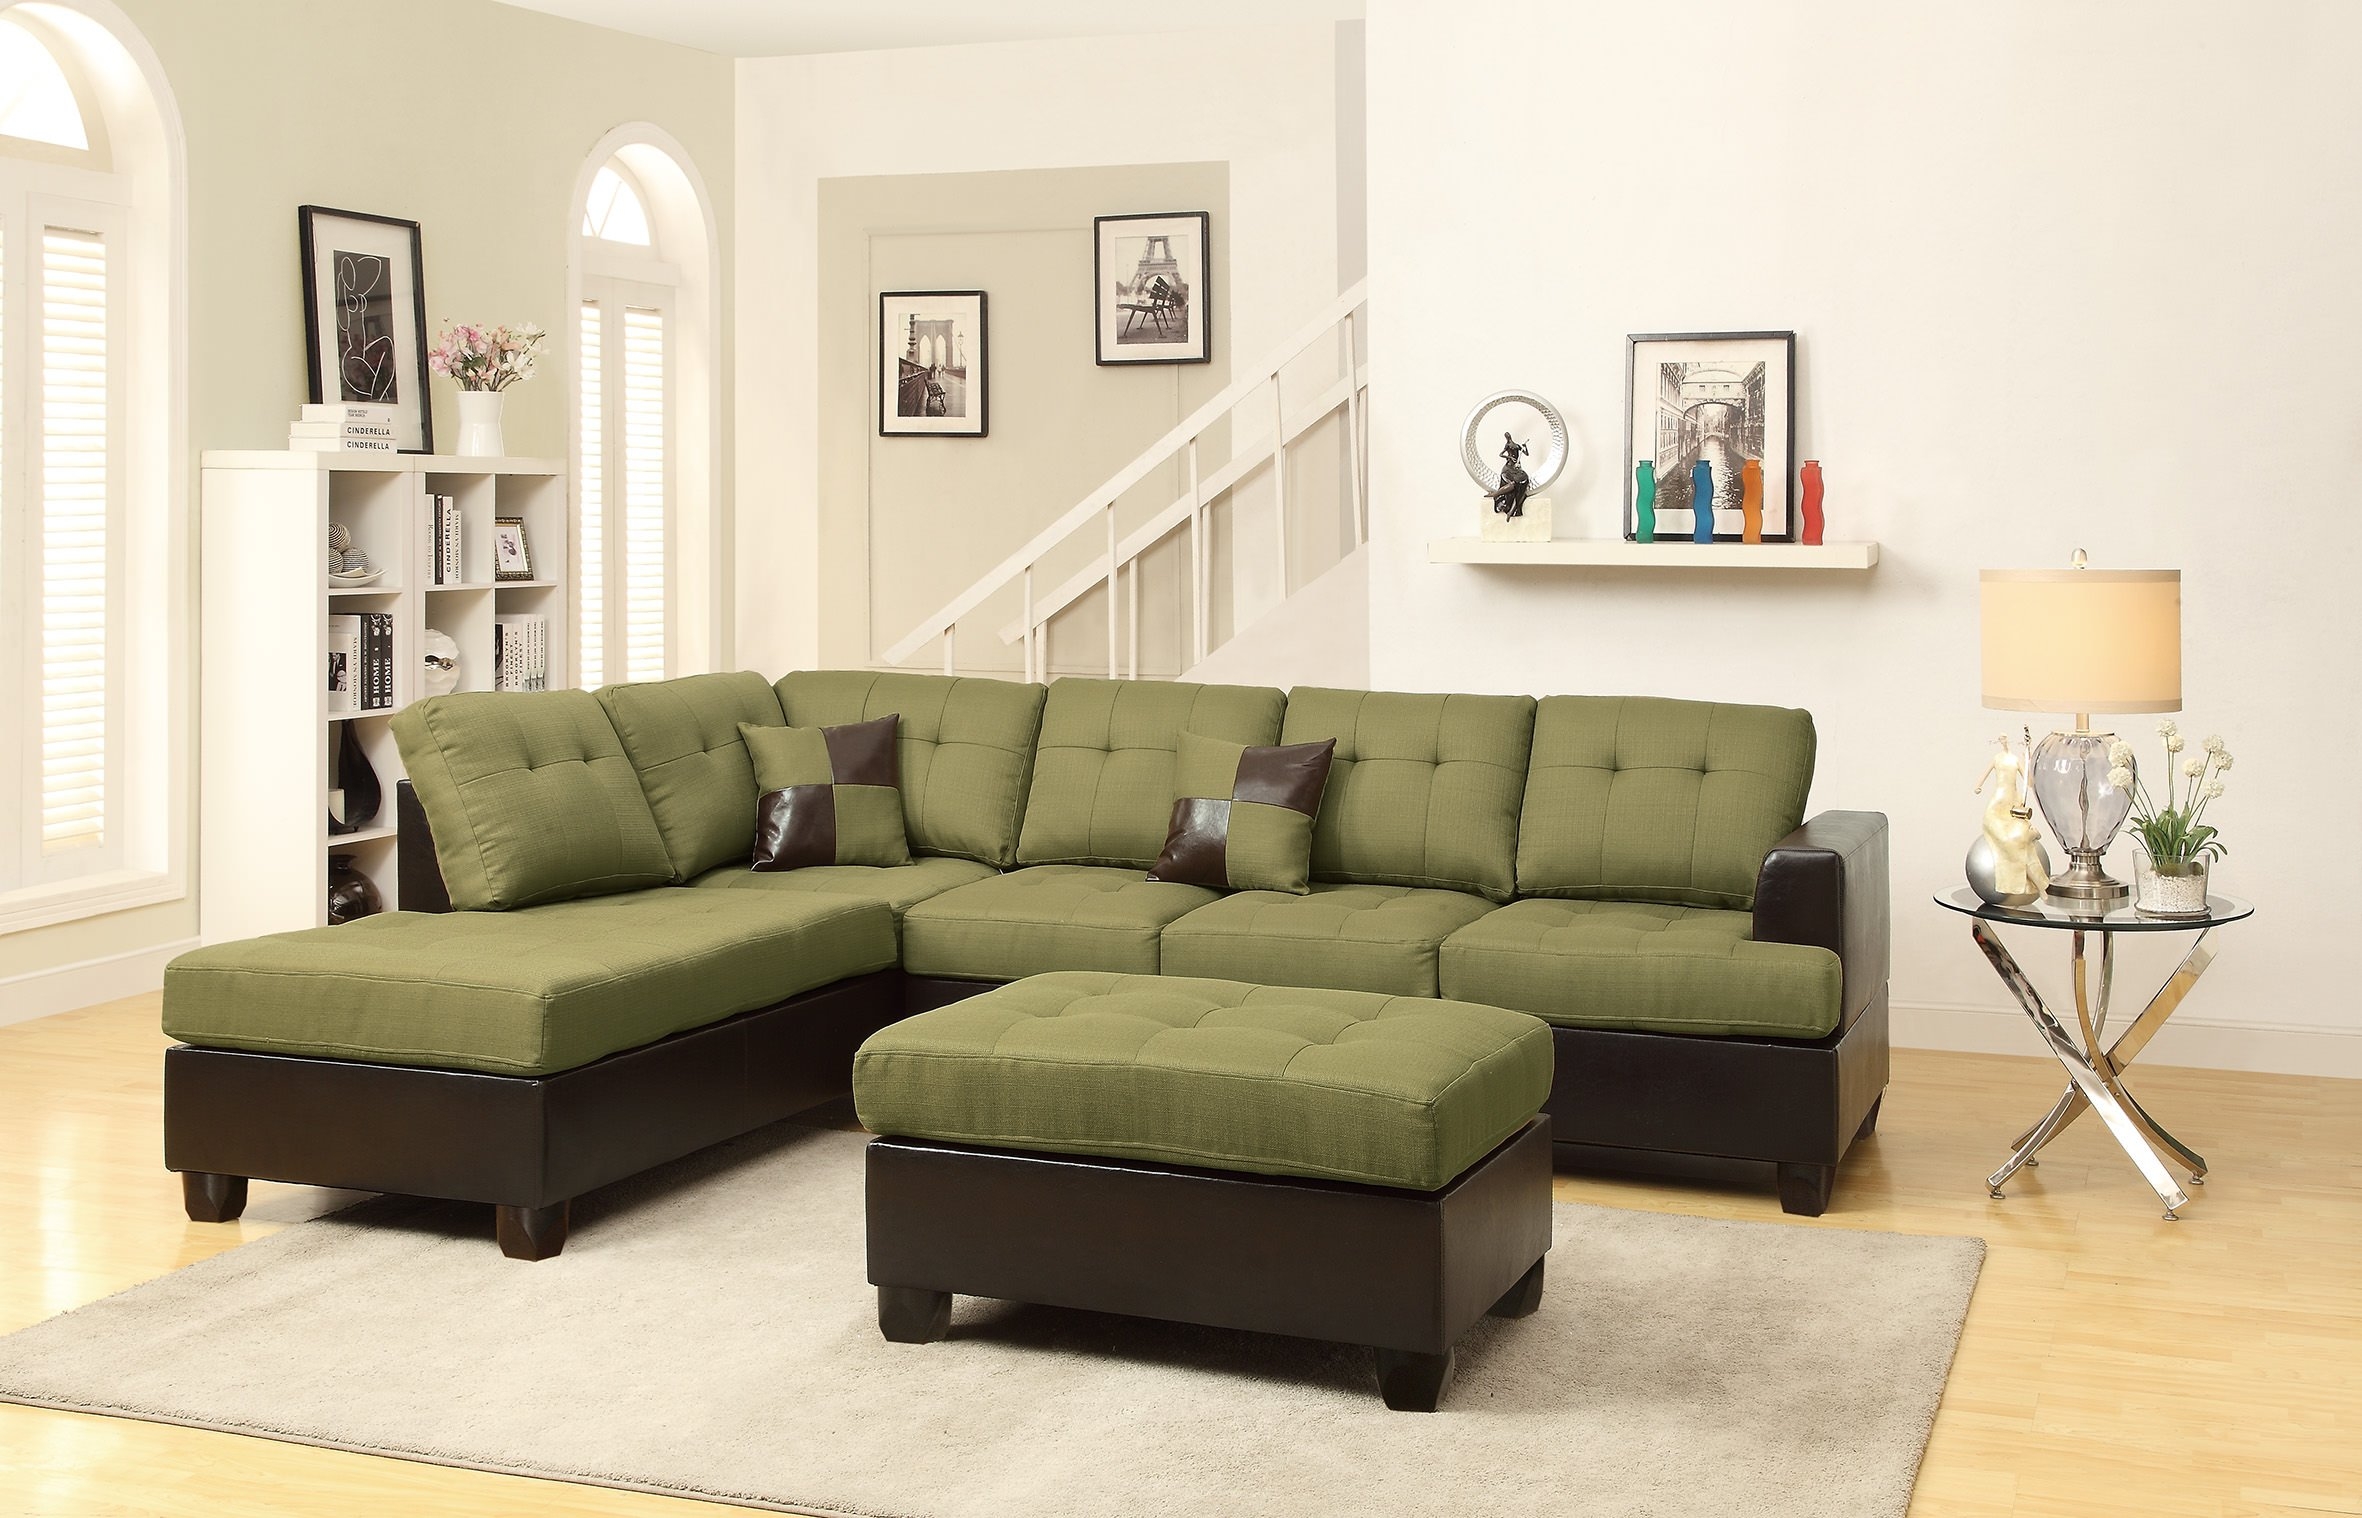 Poundex Bobkona Winden Blended Linen 3-Piece Reversible Sectional Sofa with Ottoman, Peridot